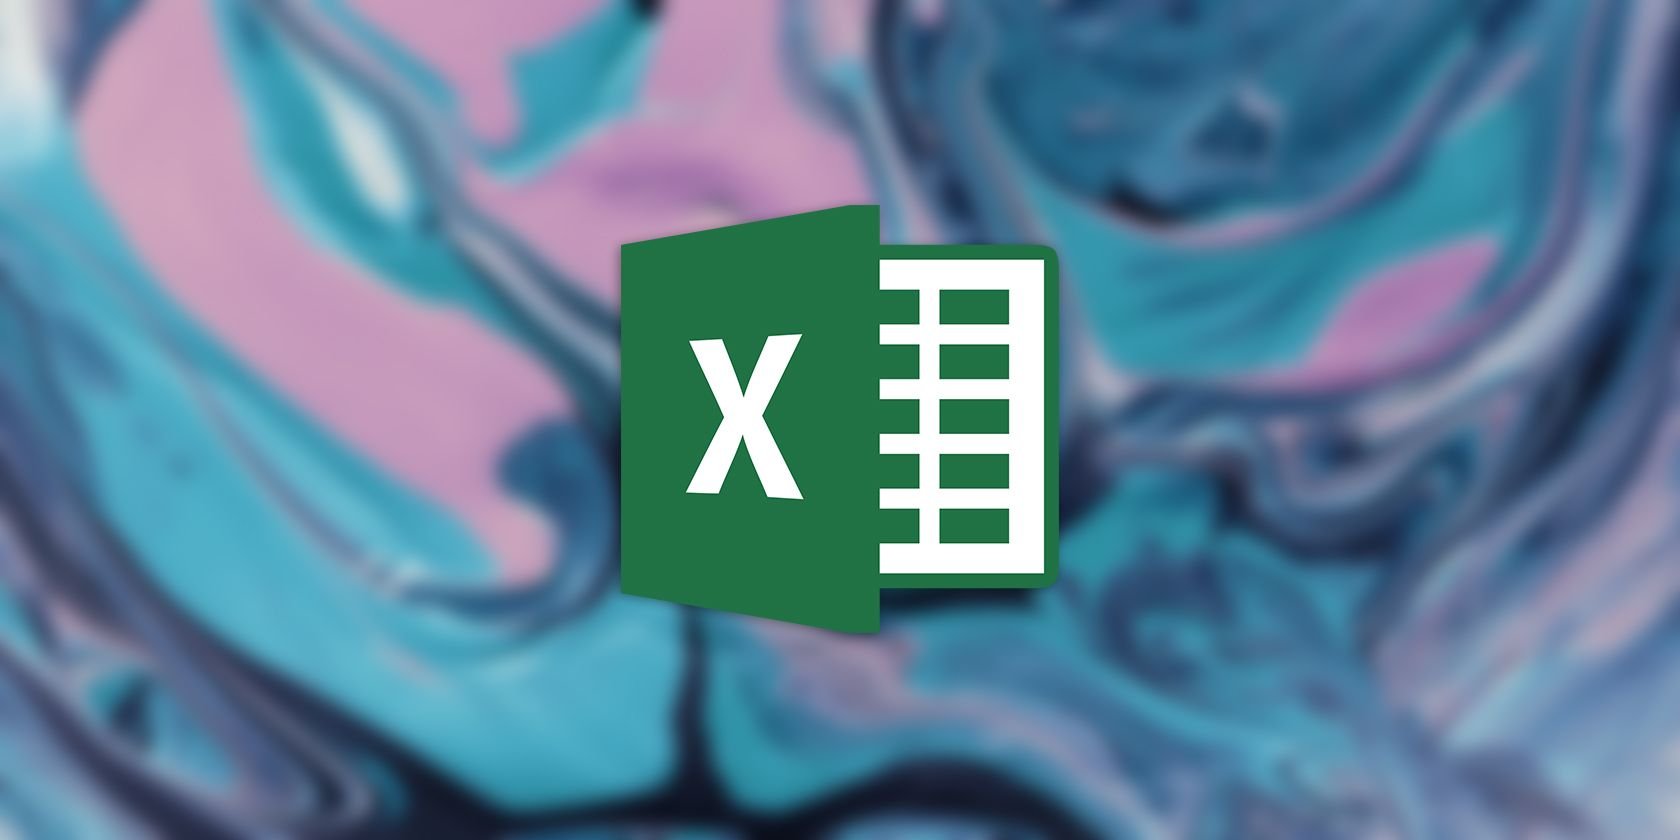 How to Check if Two Values Are Equal in Excel